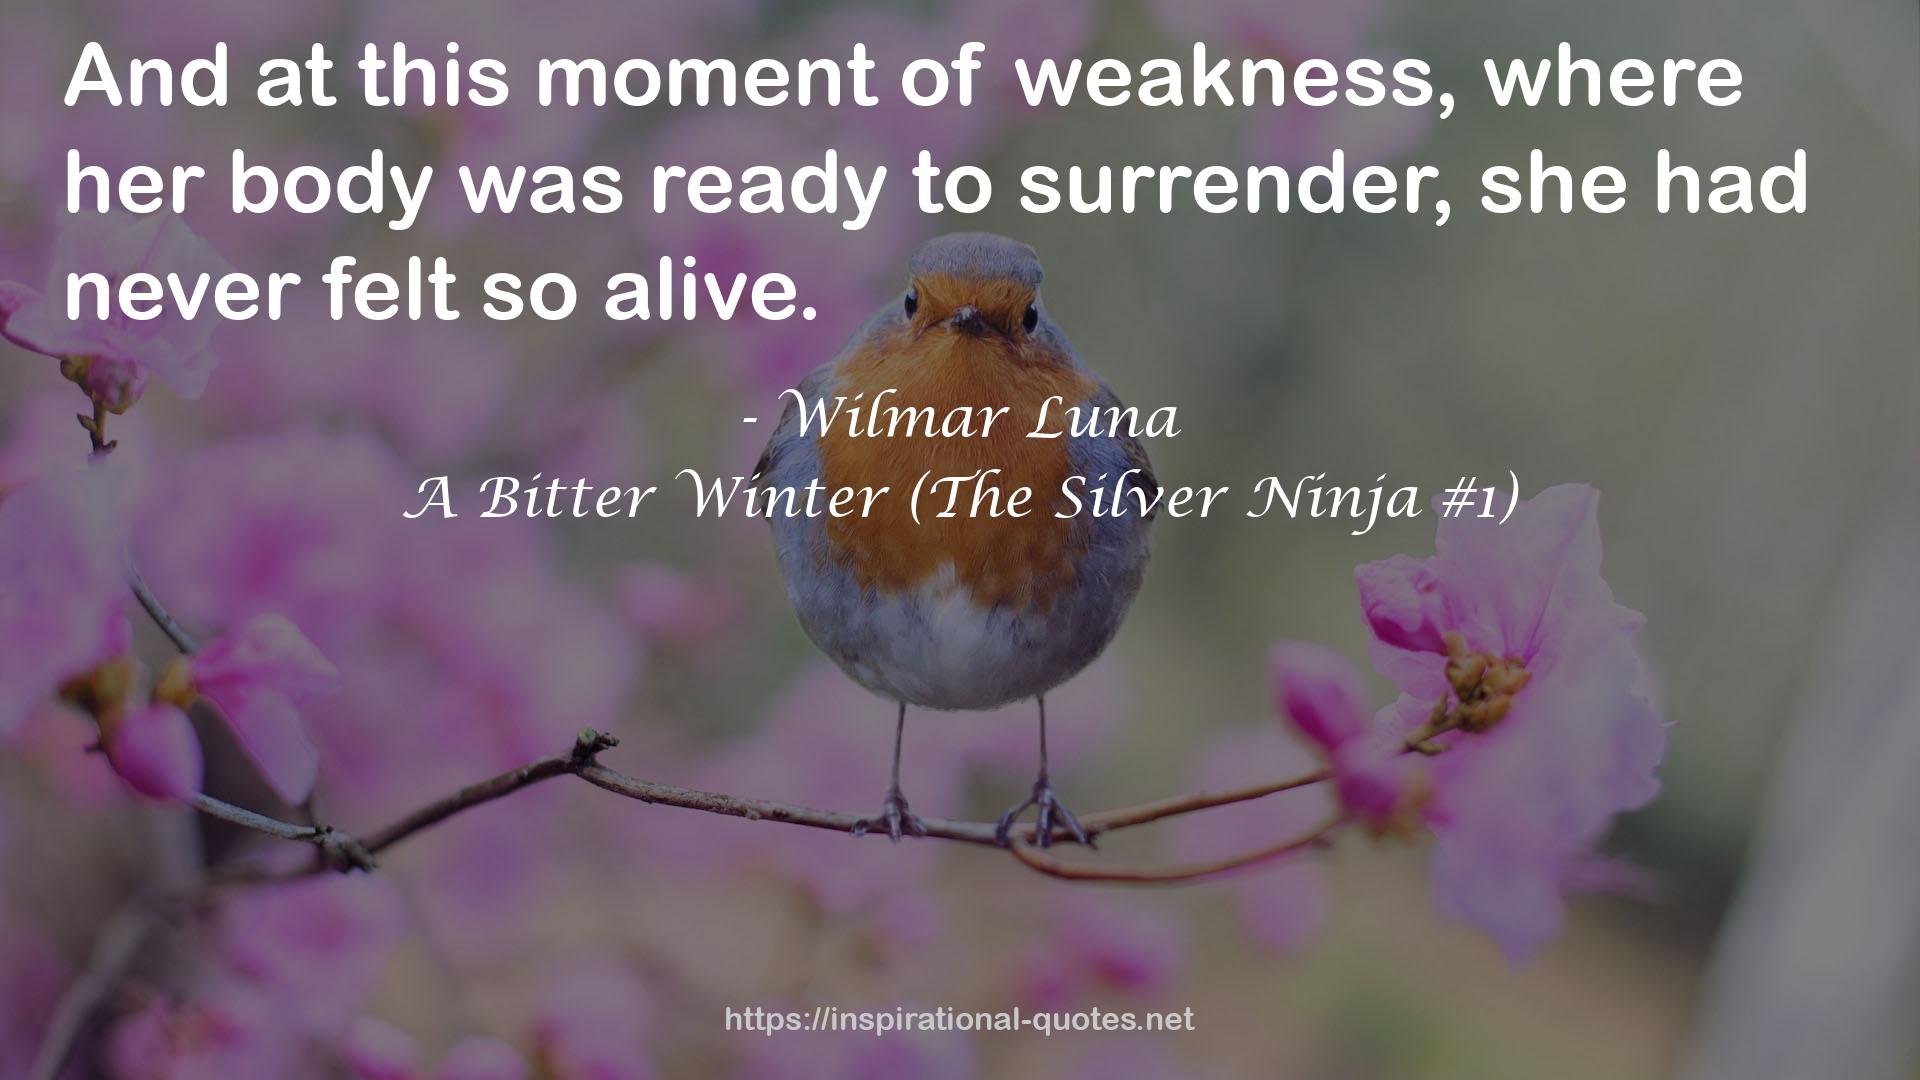 A Bitter Winter (The Silver Ninja #1) QUOTES